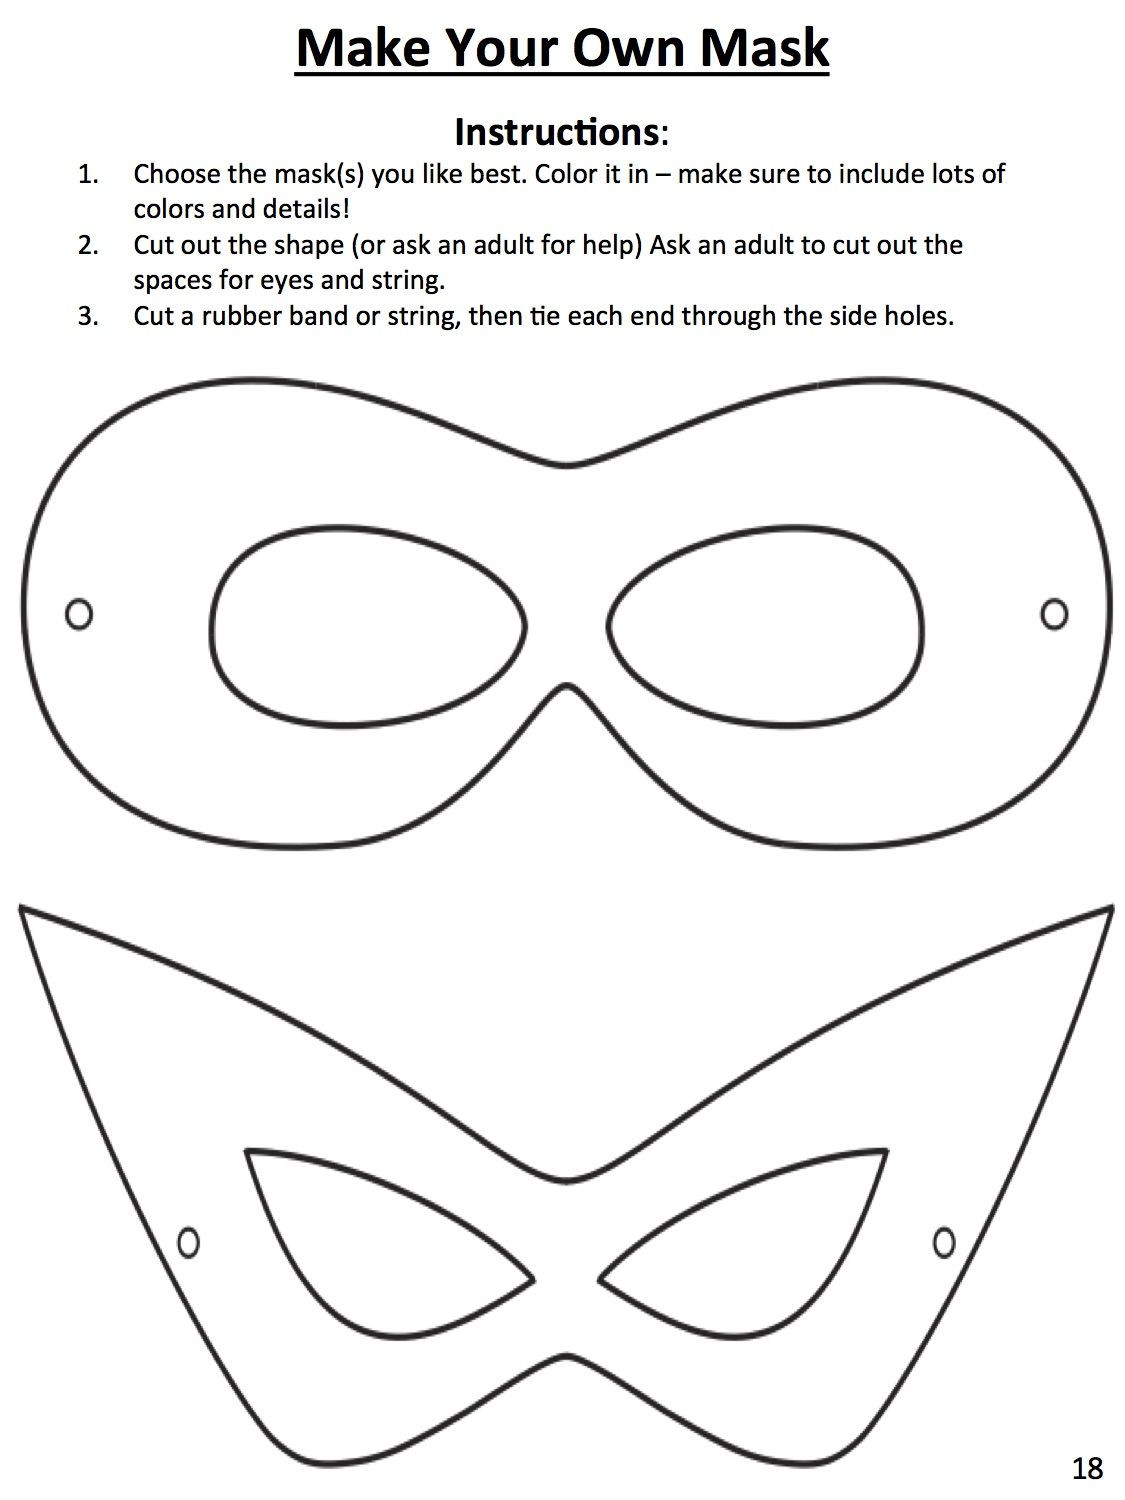 DIY Superhero Mask Template
 Download this template to design your own superhero mask